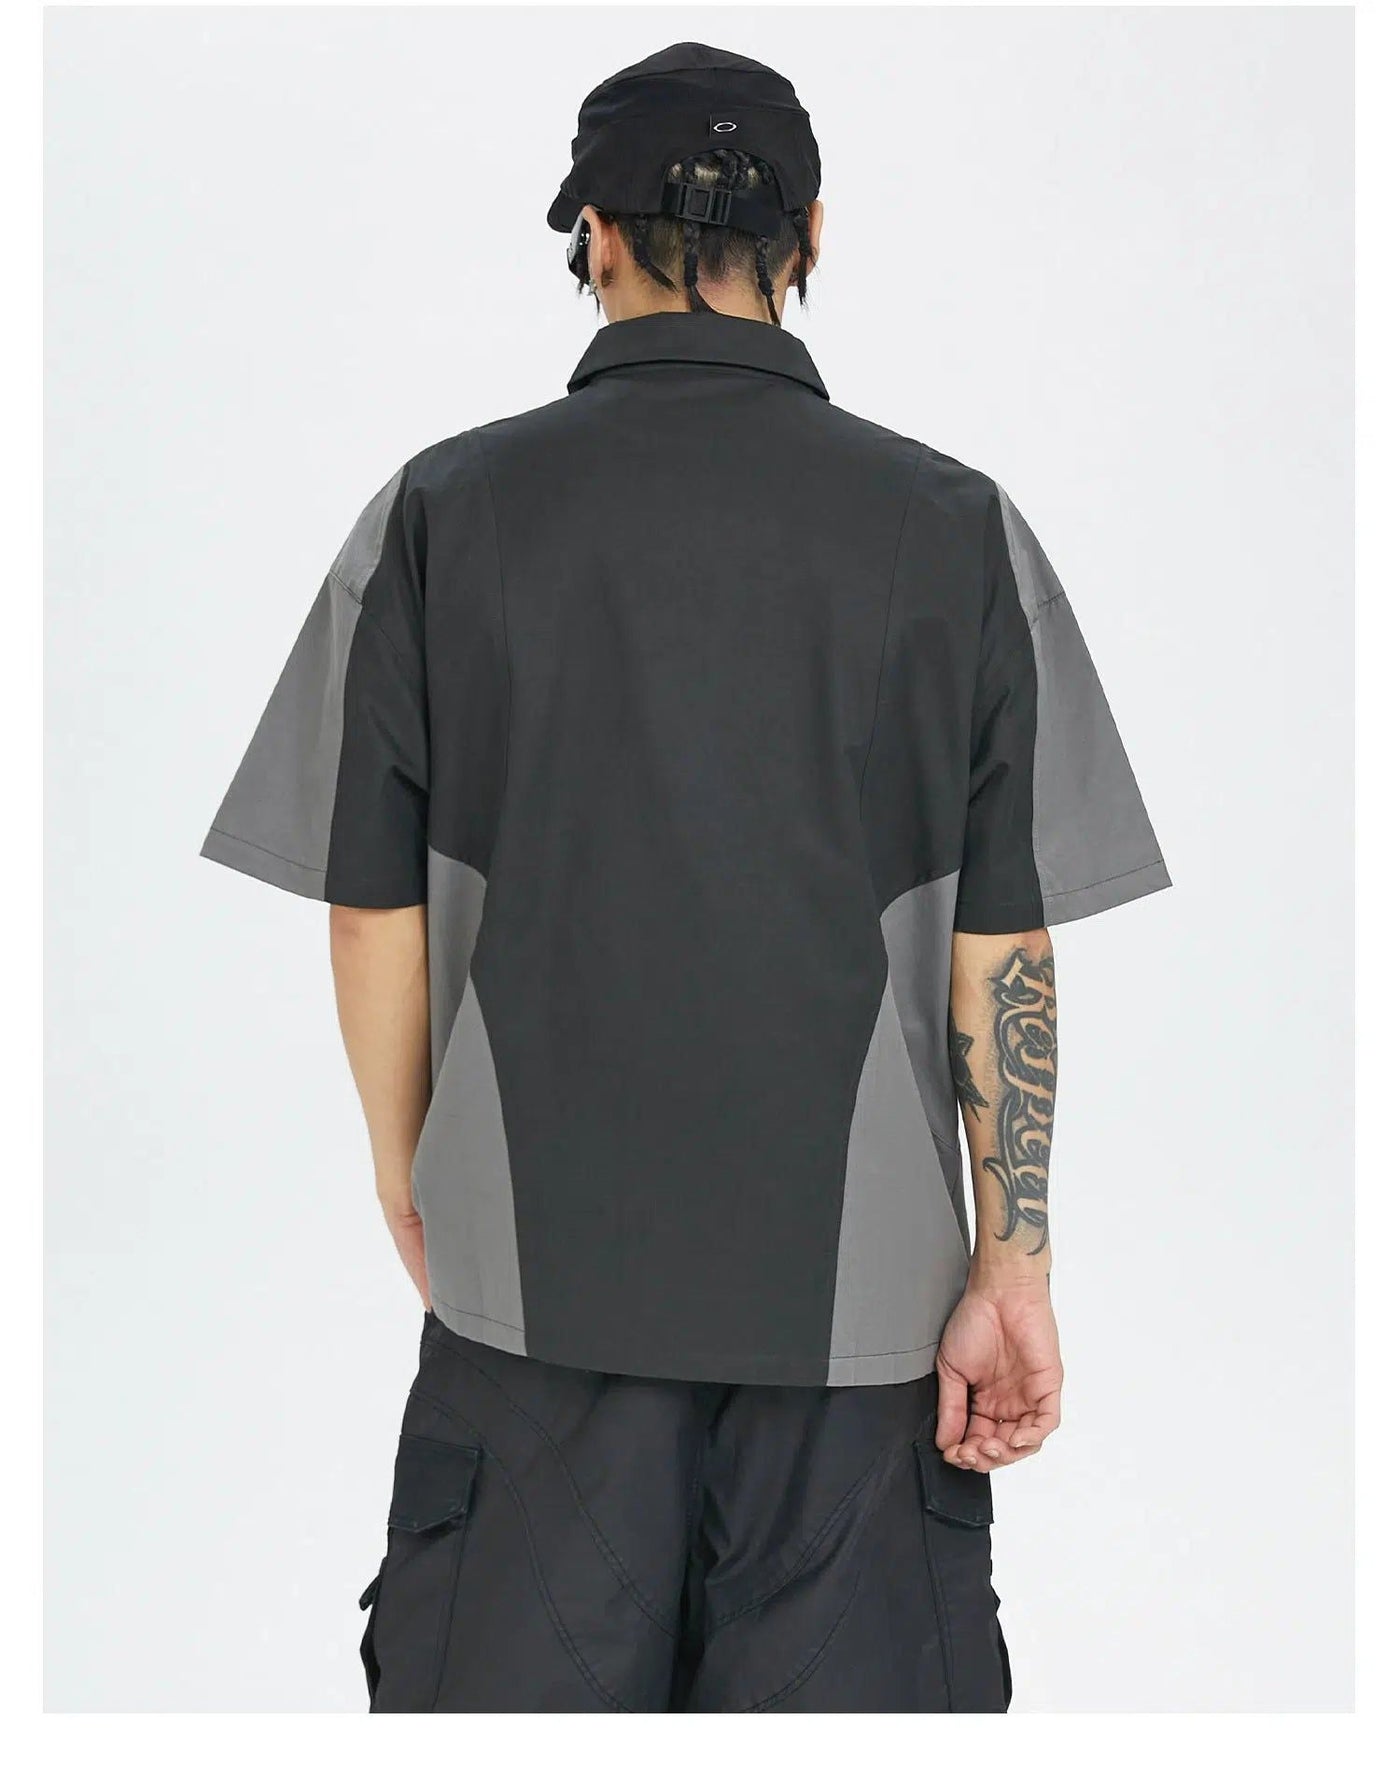 Spliced and Zipped Shirt Korean Street Fashion Shirt By Face2Face Shop Online at OH Vault